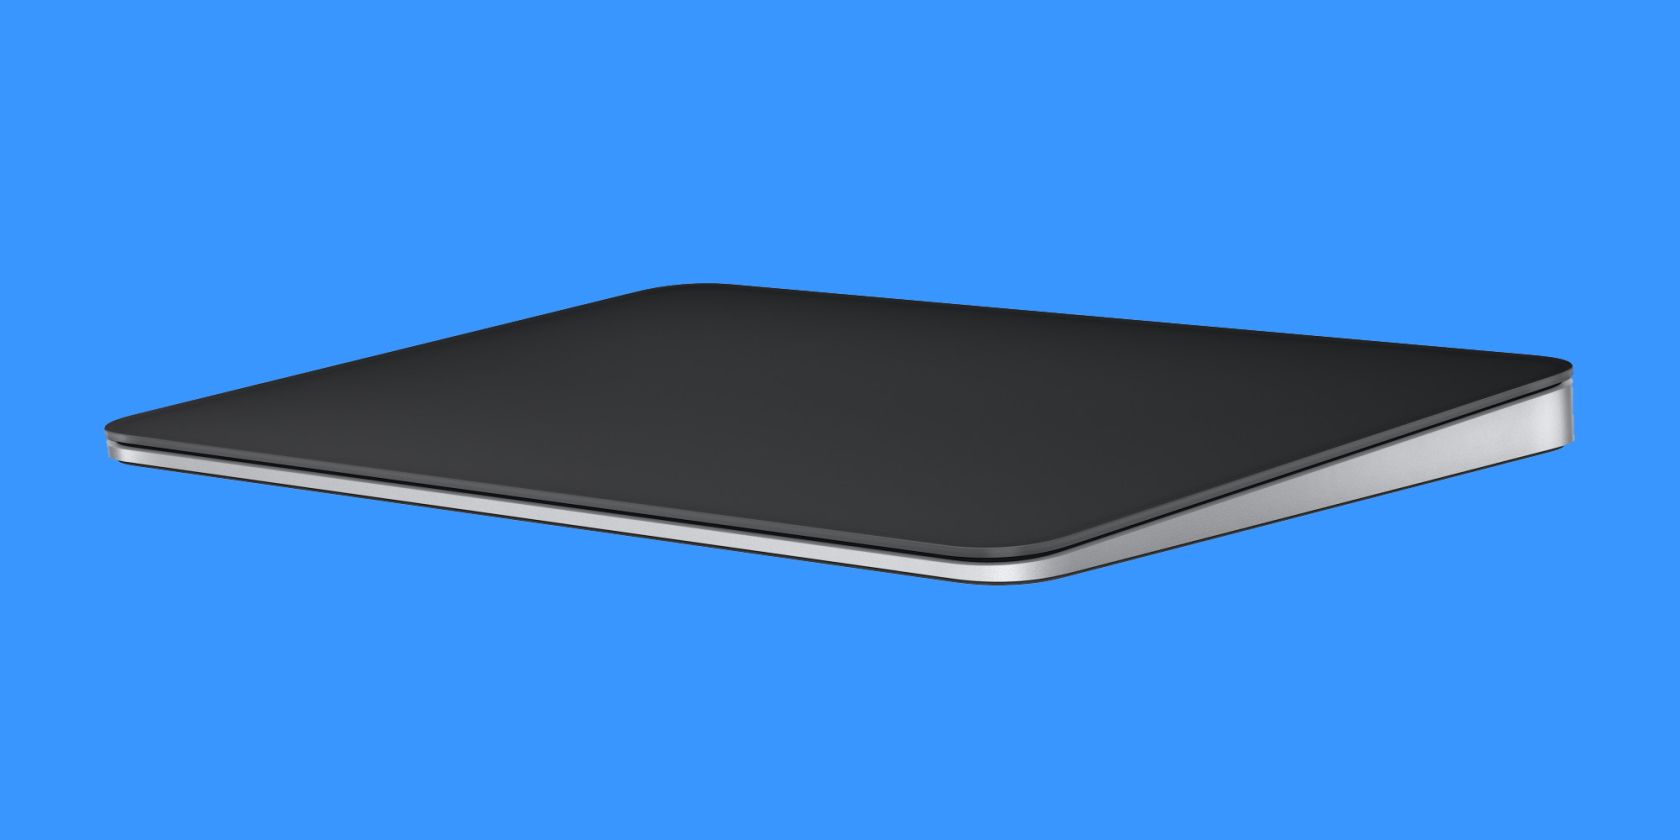 The Pros and Cons of Using Apple’s Magic Trackpad